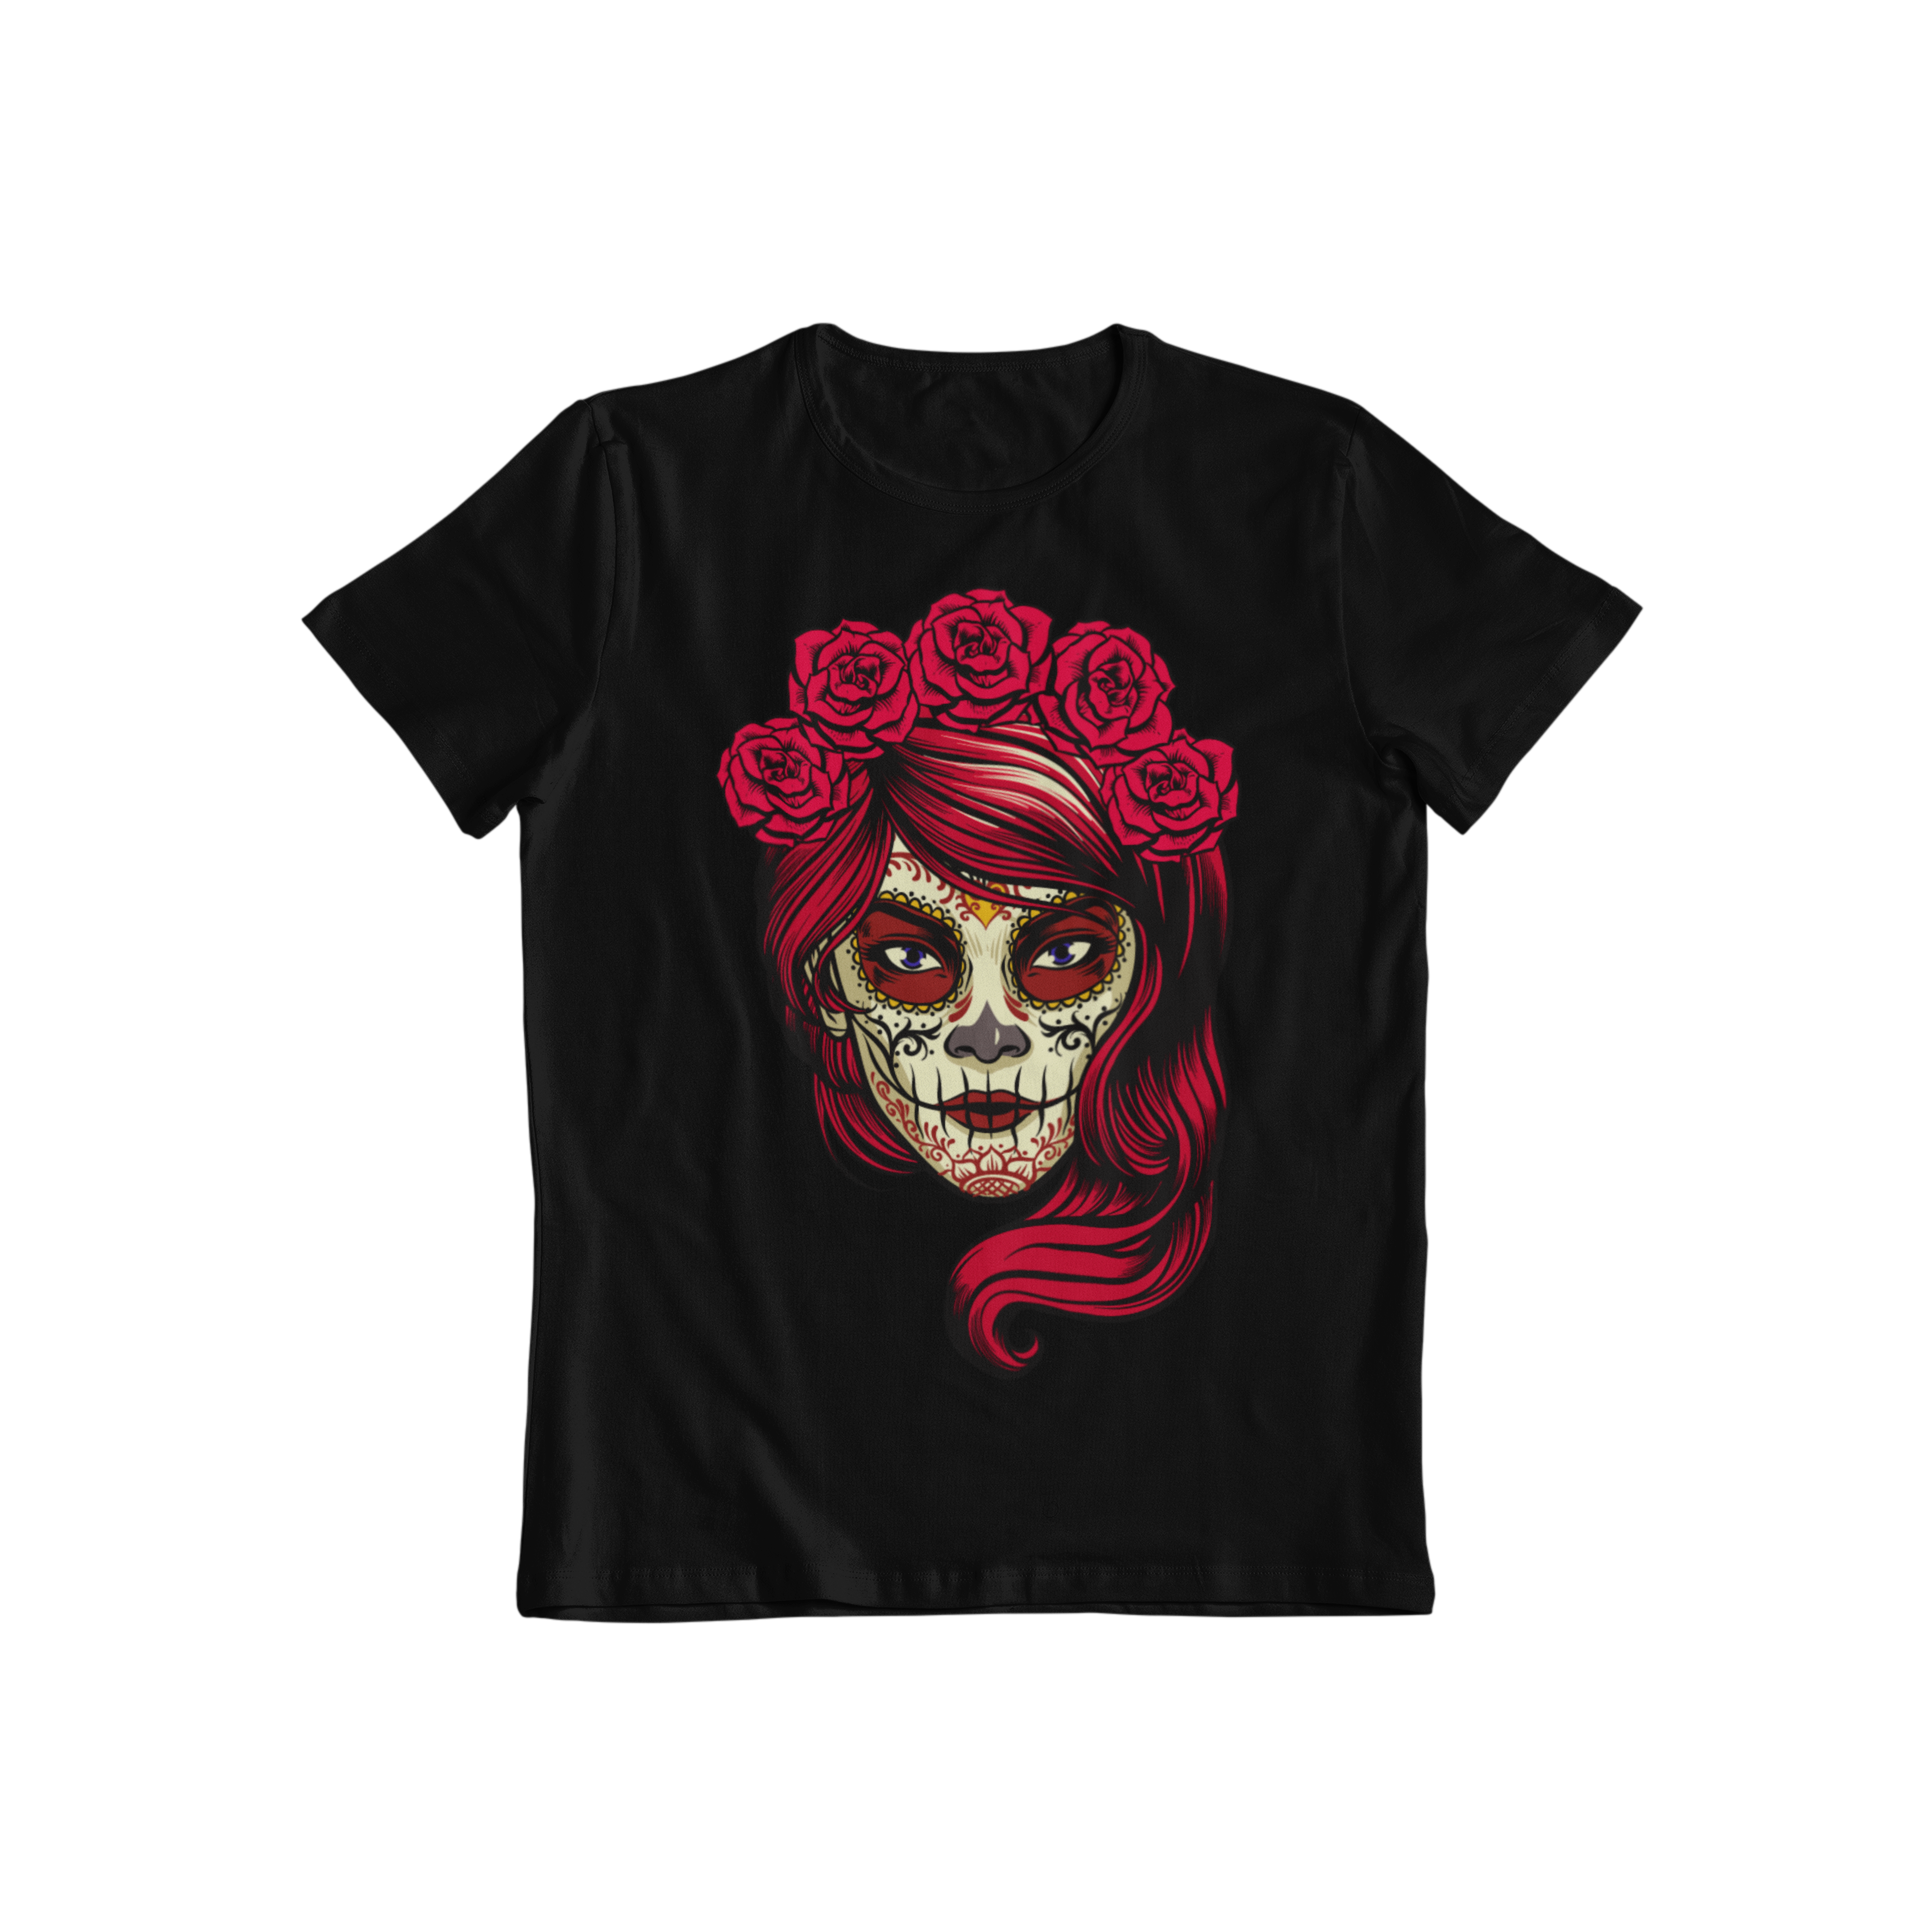 Looking for a unique and bold graphic t-shirt? Teevolution has the perfect addition to your wardrobe with its bright calavera design featuring a painted face and roses in hair. Stand out from the crowd with this eye-catching t-shirt!